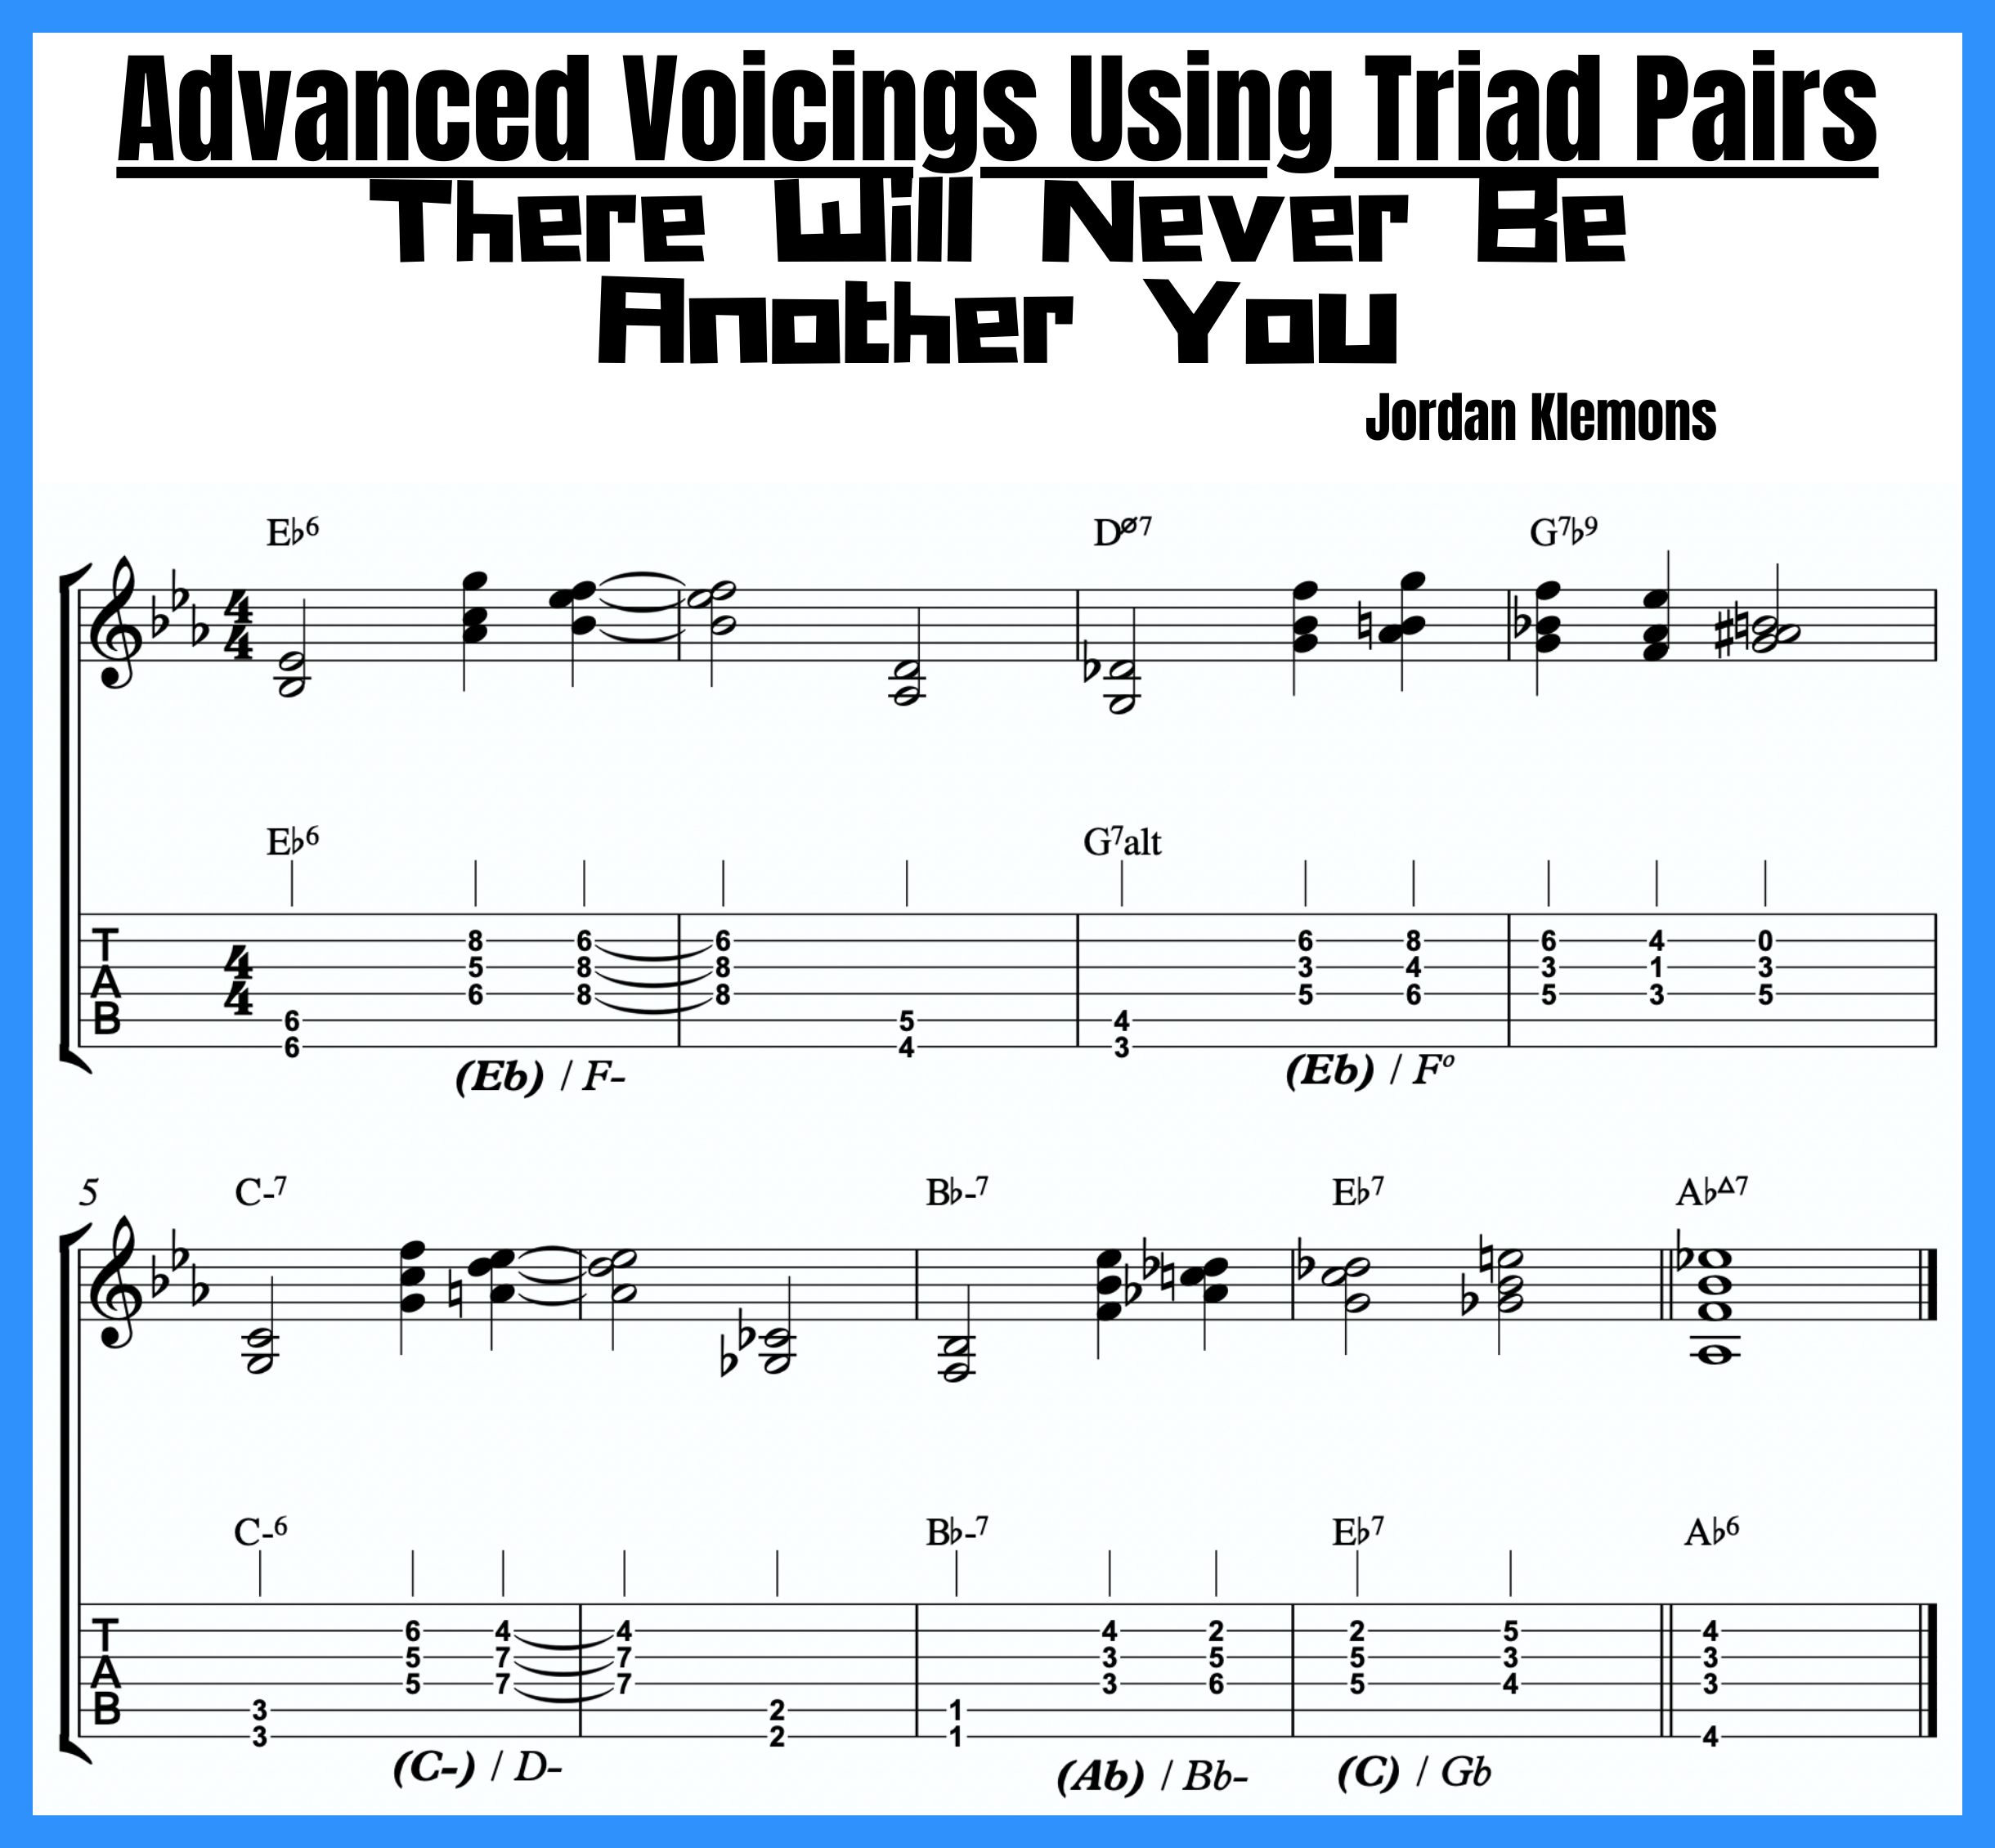 Advanced voicings using triad pairs!-triad-pair-voicings-melodic-triads-etude-there-will-never-another-you-png